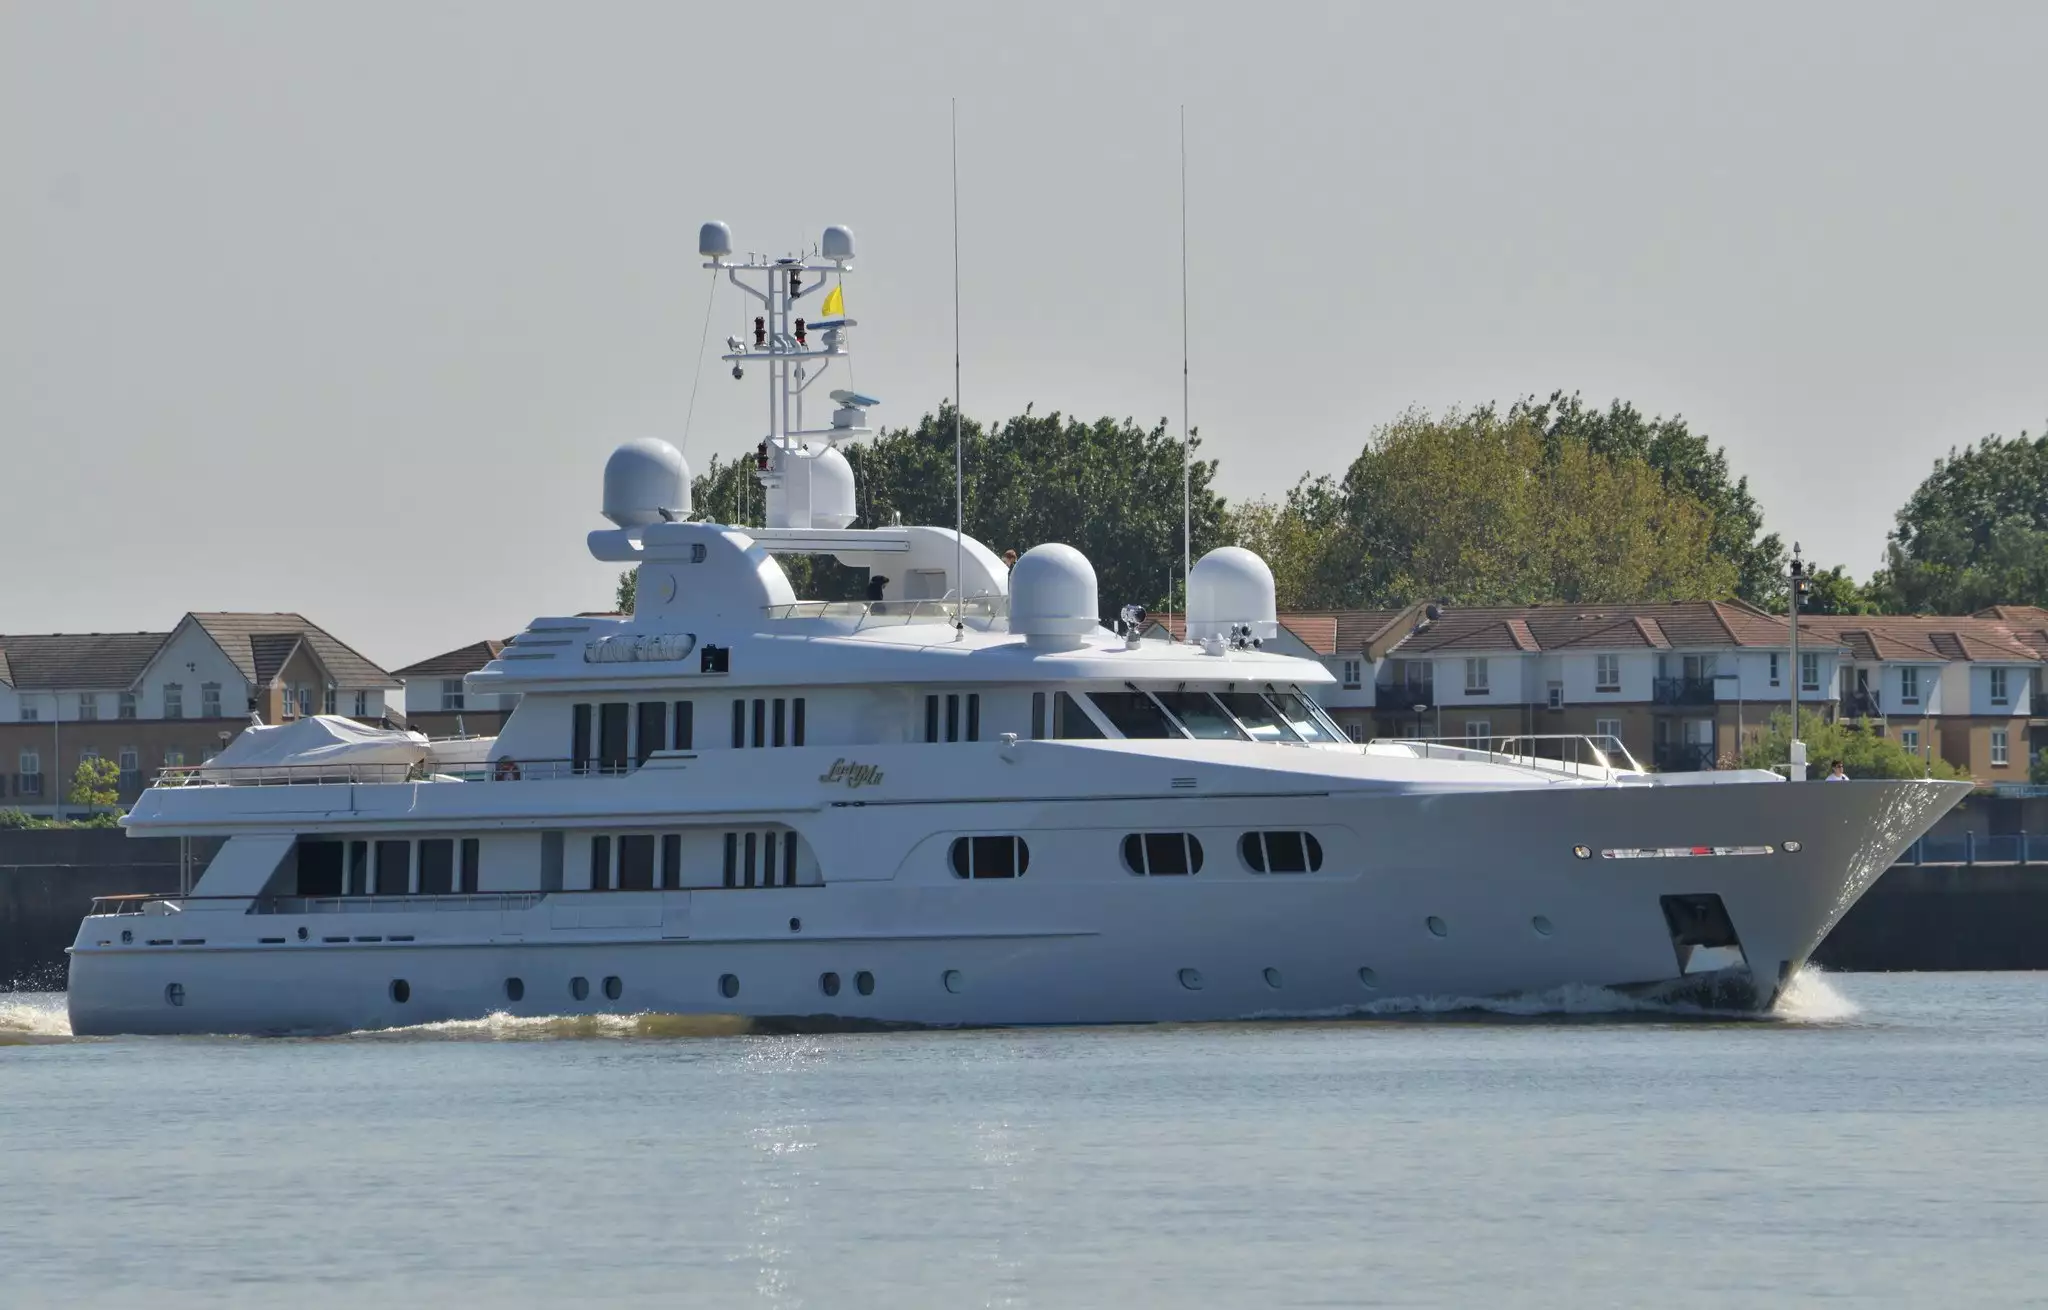 MY LADY Yacht  • My Lady • Hakvoort • 1994 • Owner Lord Ashcroft of Chichester